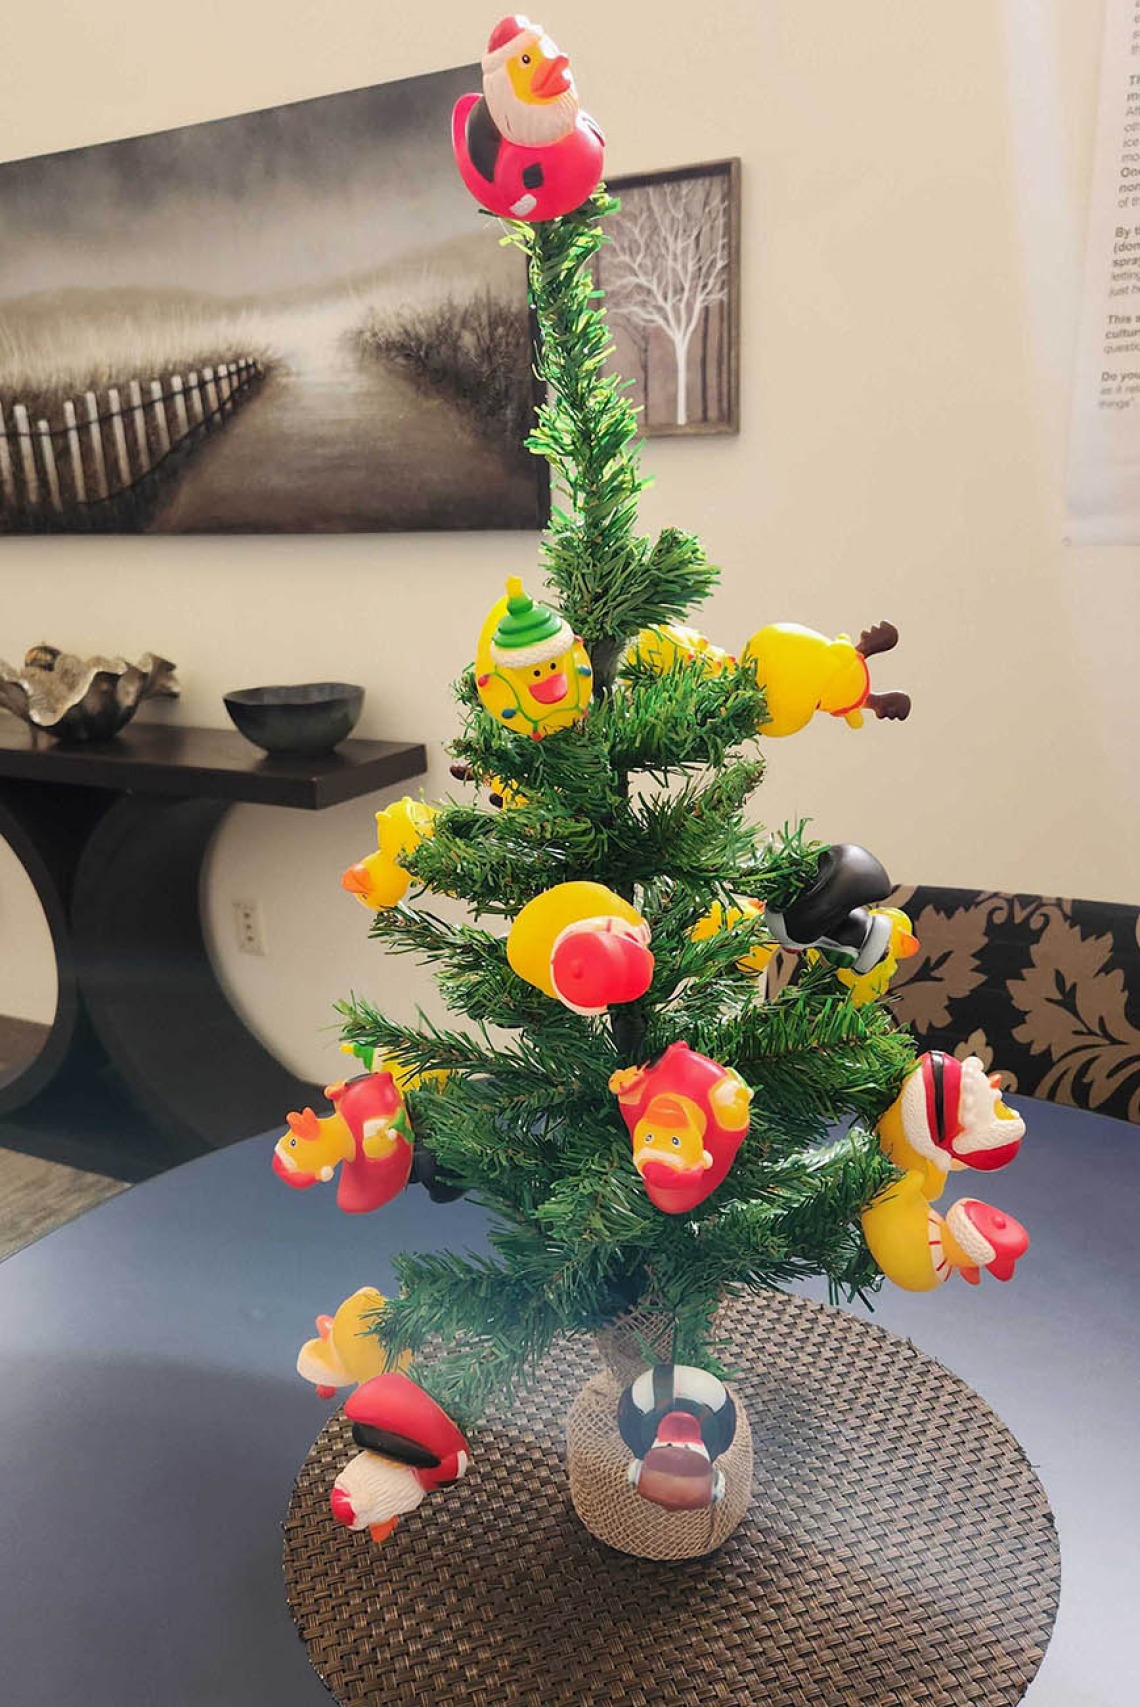 If you are on the UArizona Health Sciences Phoenix campus this holiday season, duck into Building 1 and the office of Tony Malaj, executive director of campus management and operations for UArizona College of Medicine – Phoenix, to see this uniquely decorated tree.